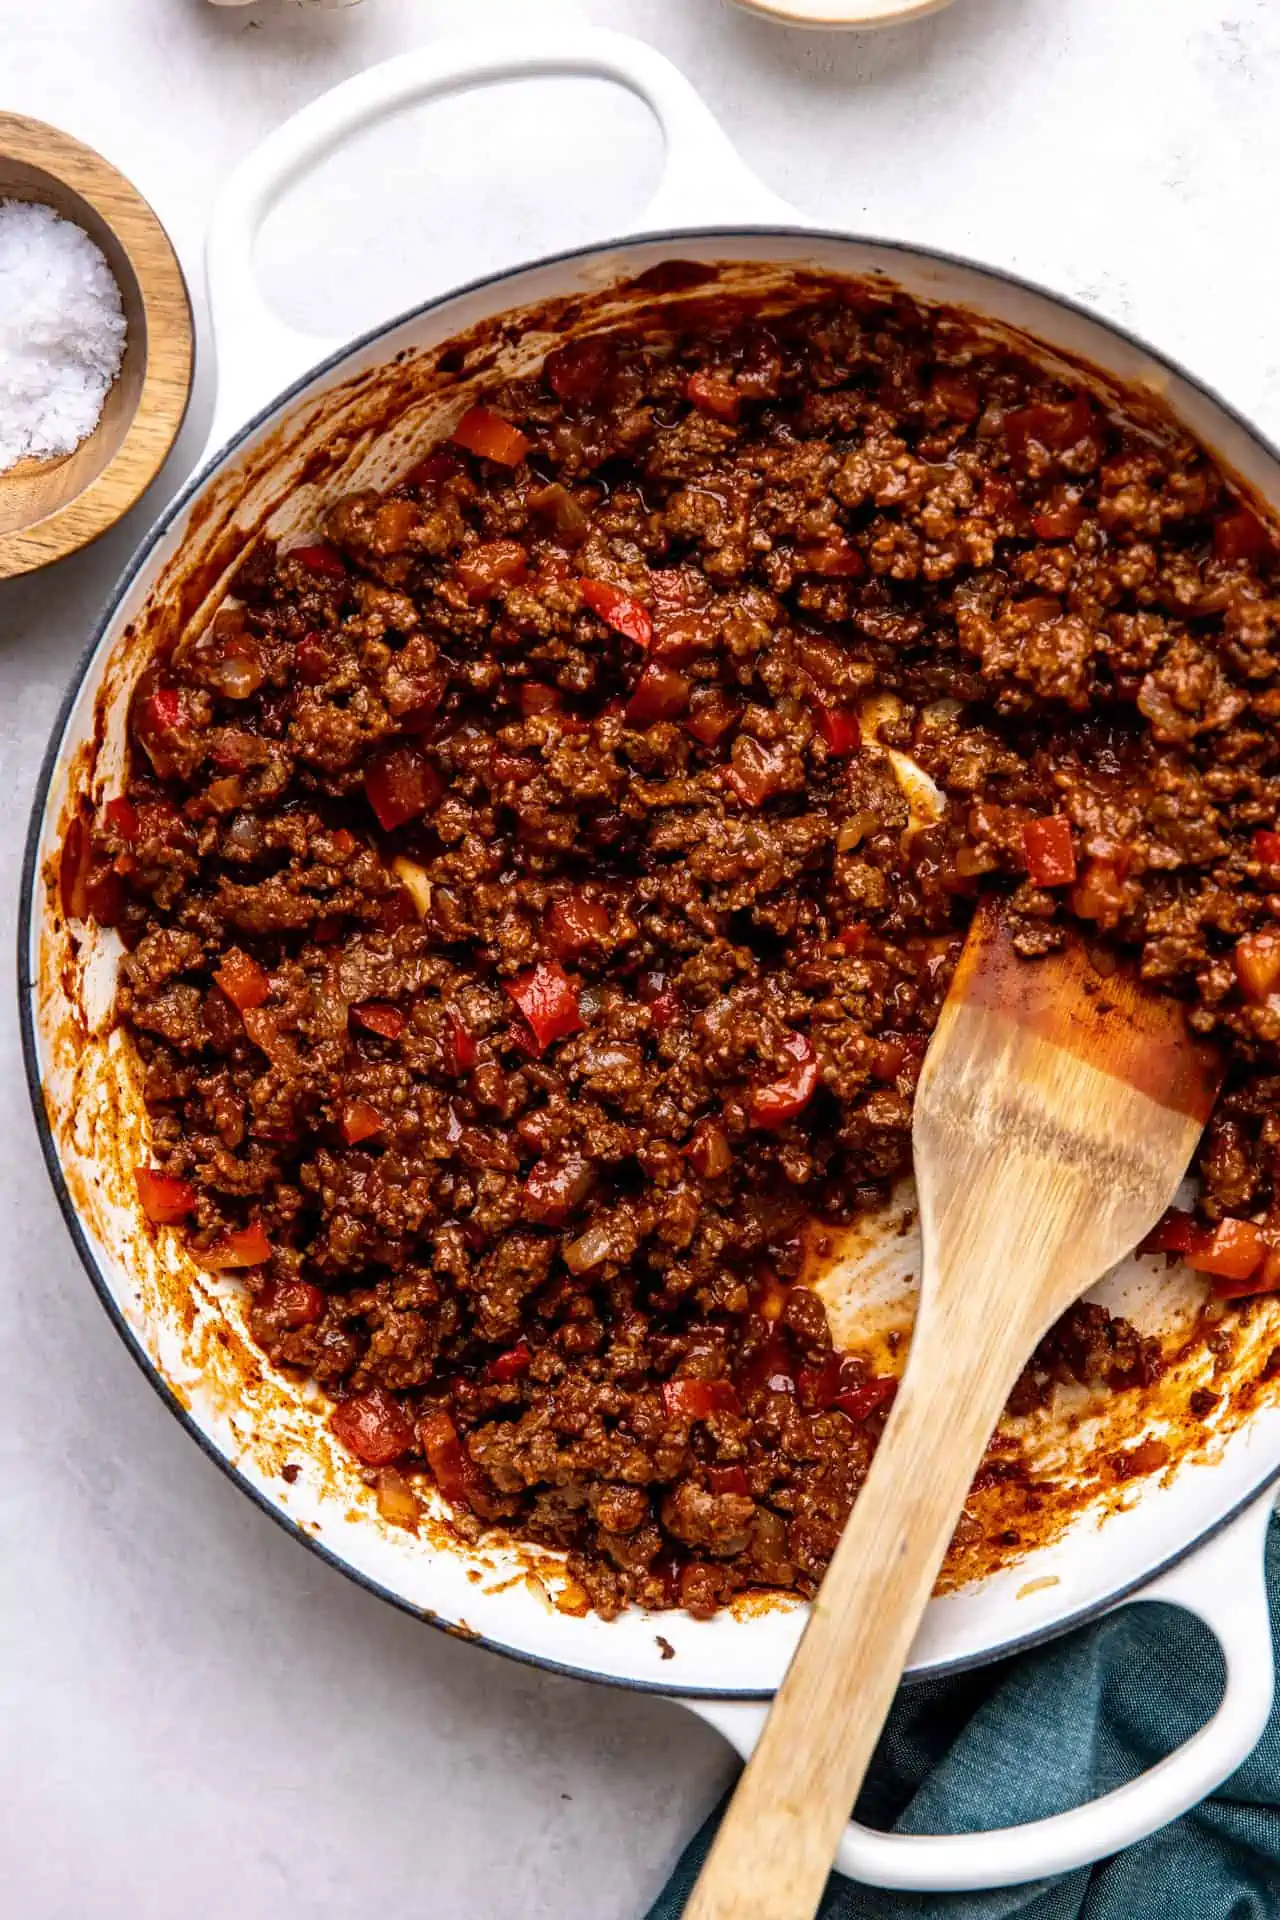 Skillet filled with cooked old fashioned sloppy joes with homemade sauce.